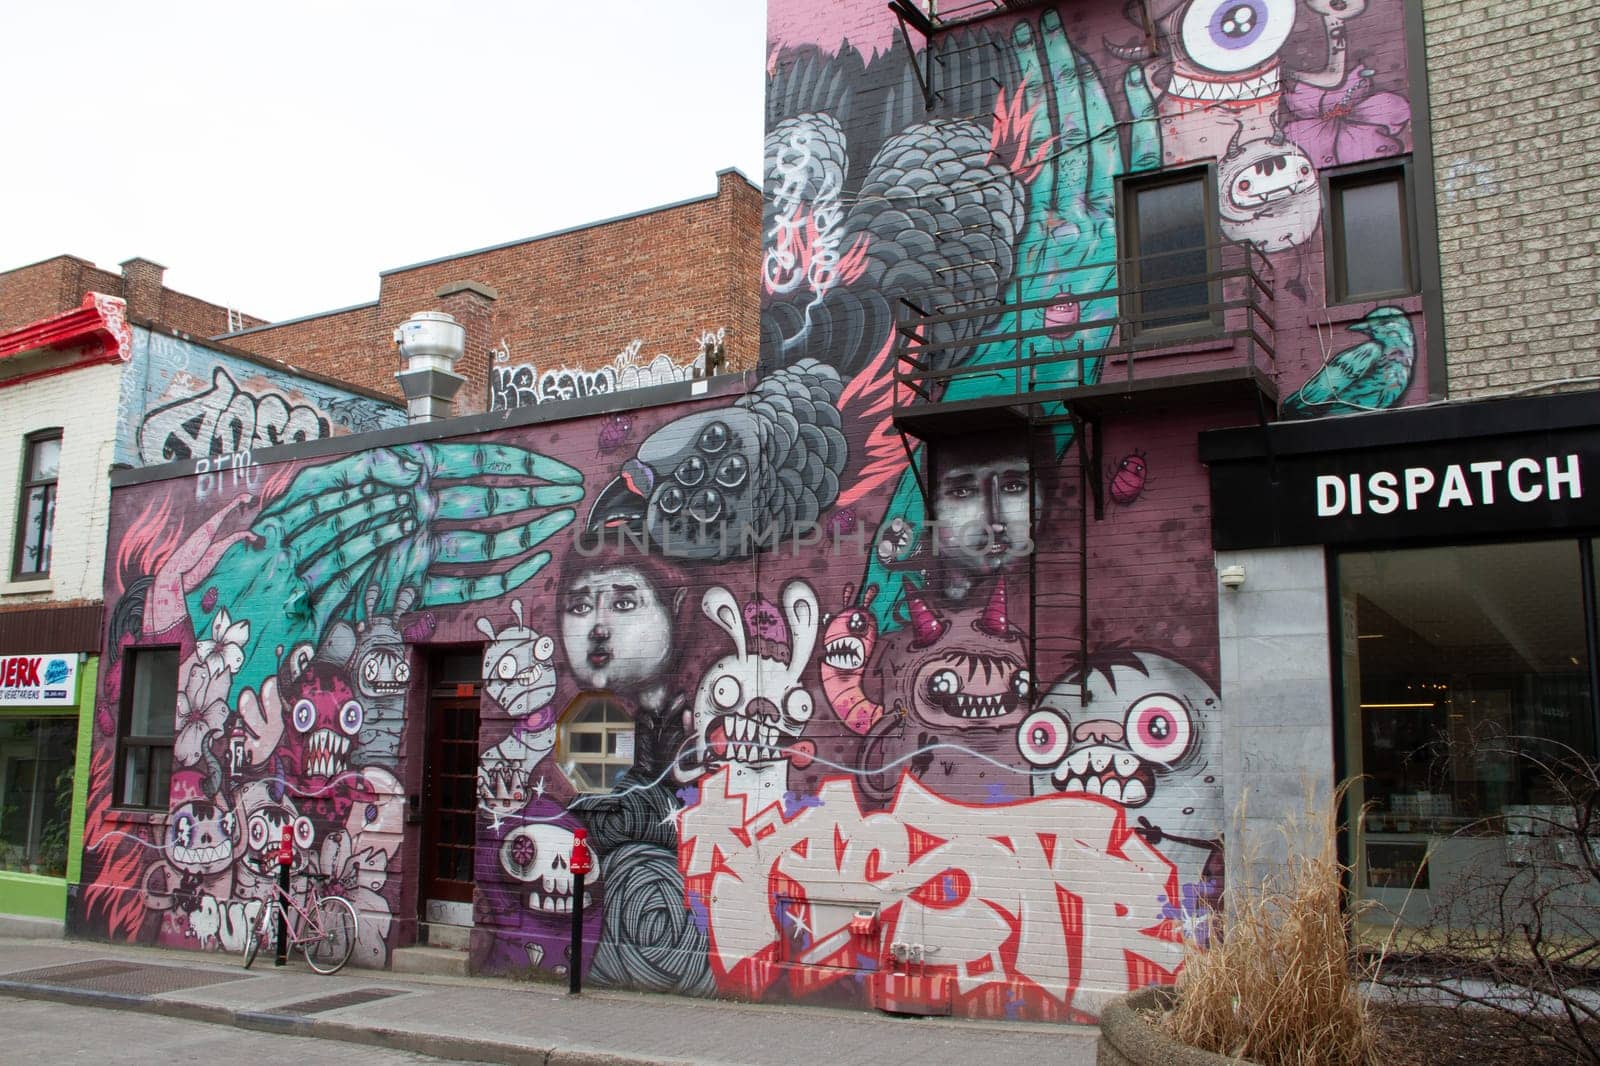 Creative graffiti street art mural lining a building in a side street of Montreal, Quebec, Canada